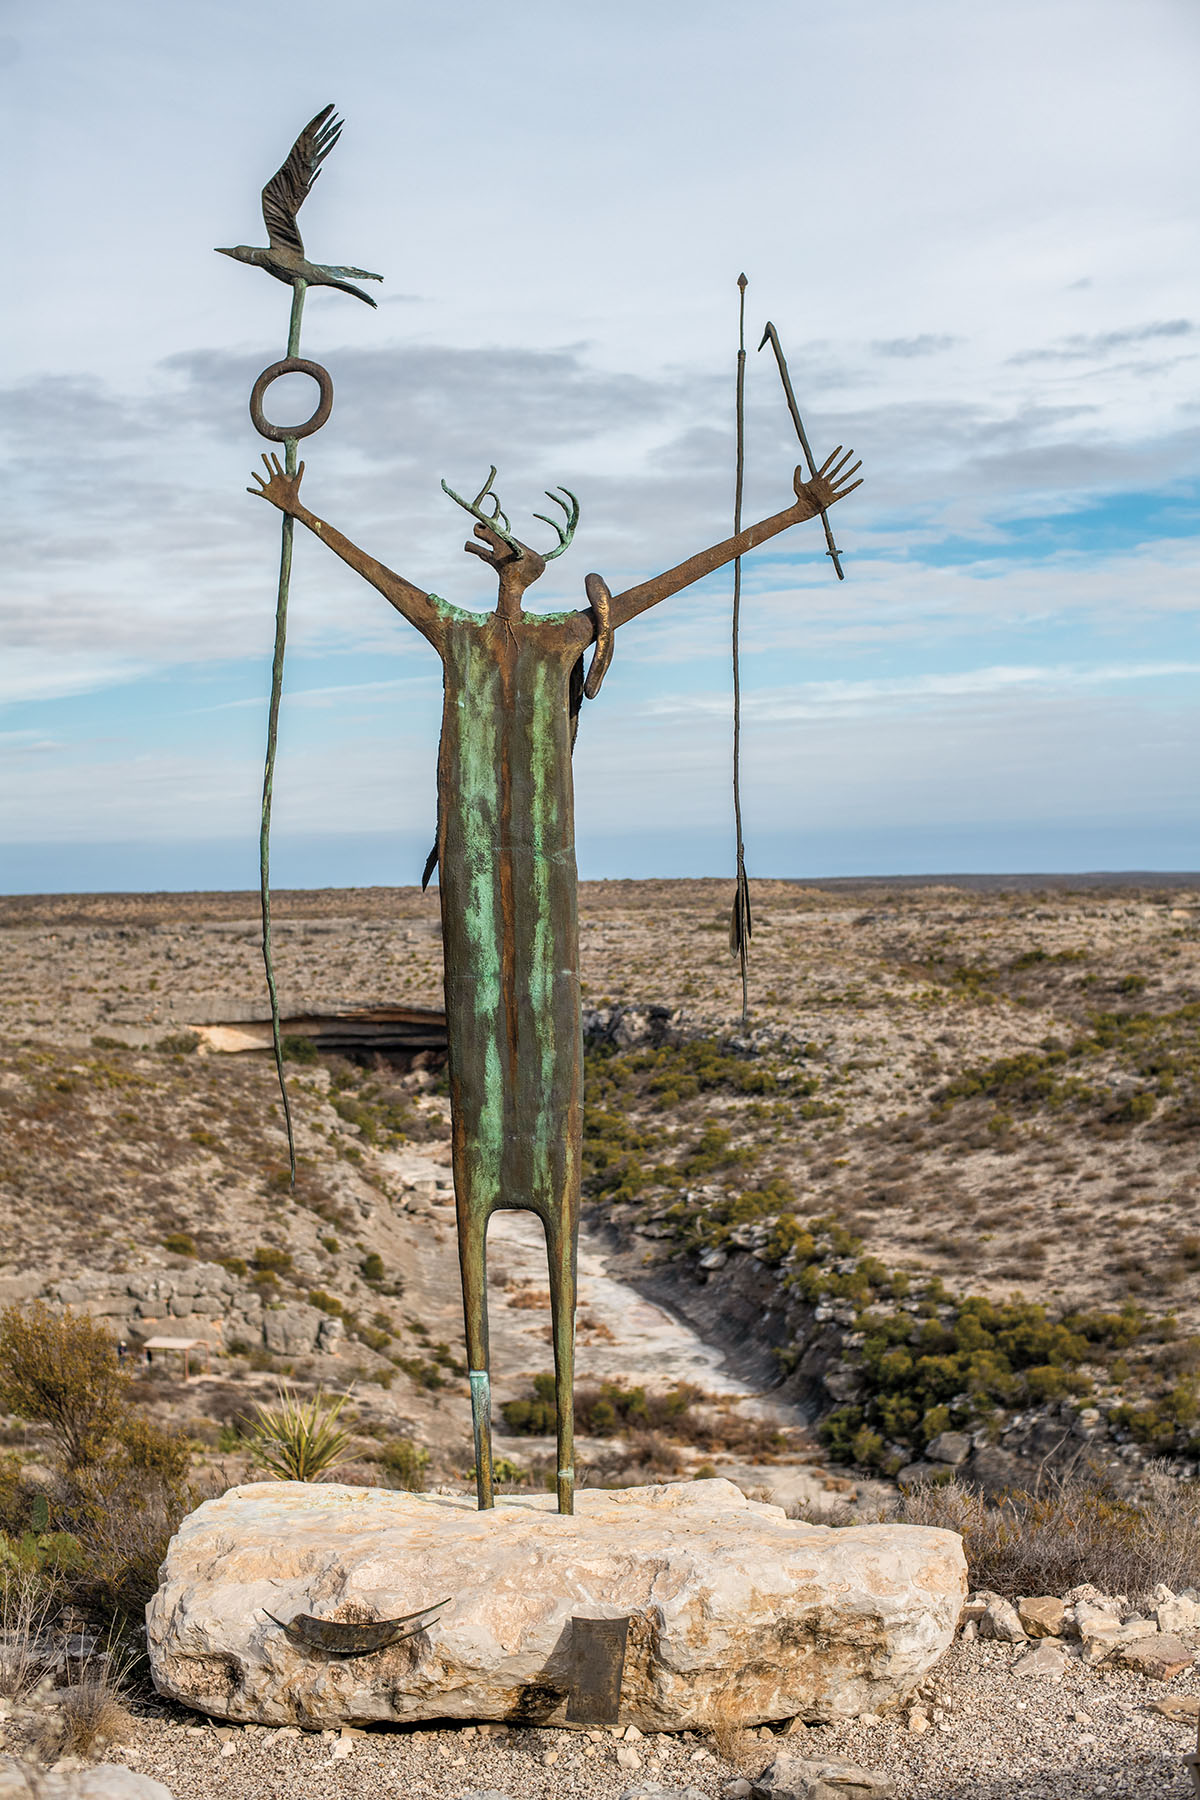 A statue of a figure with its arms outstretched on a desert landscape